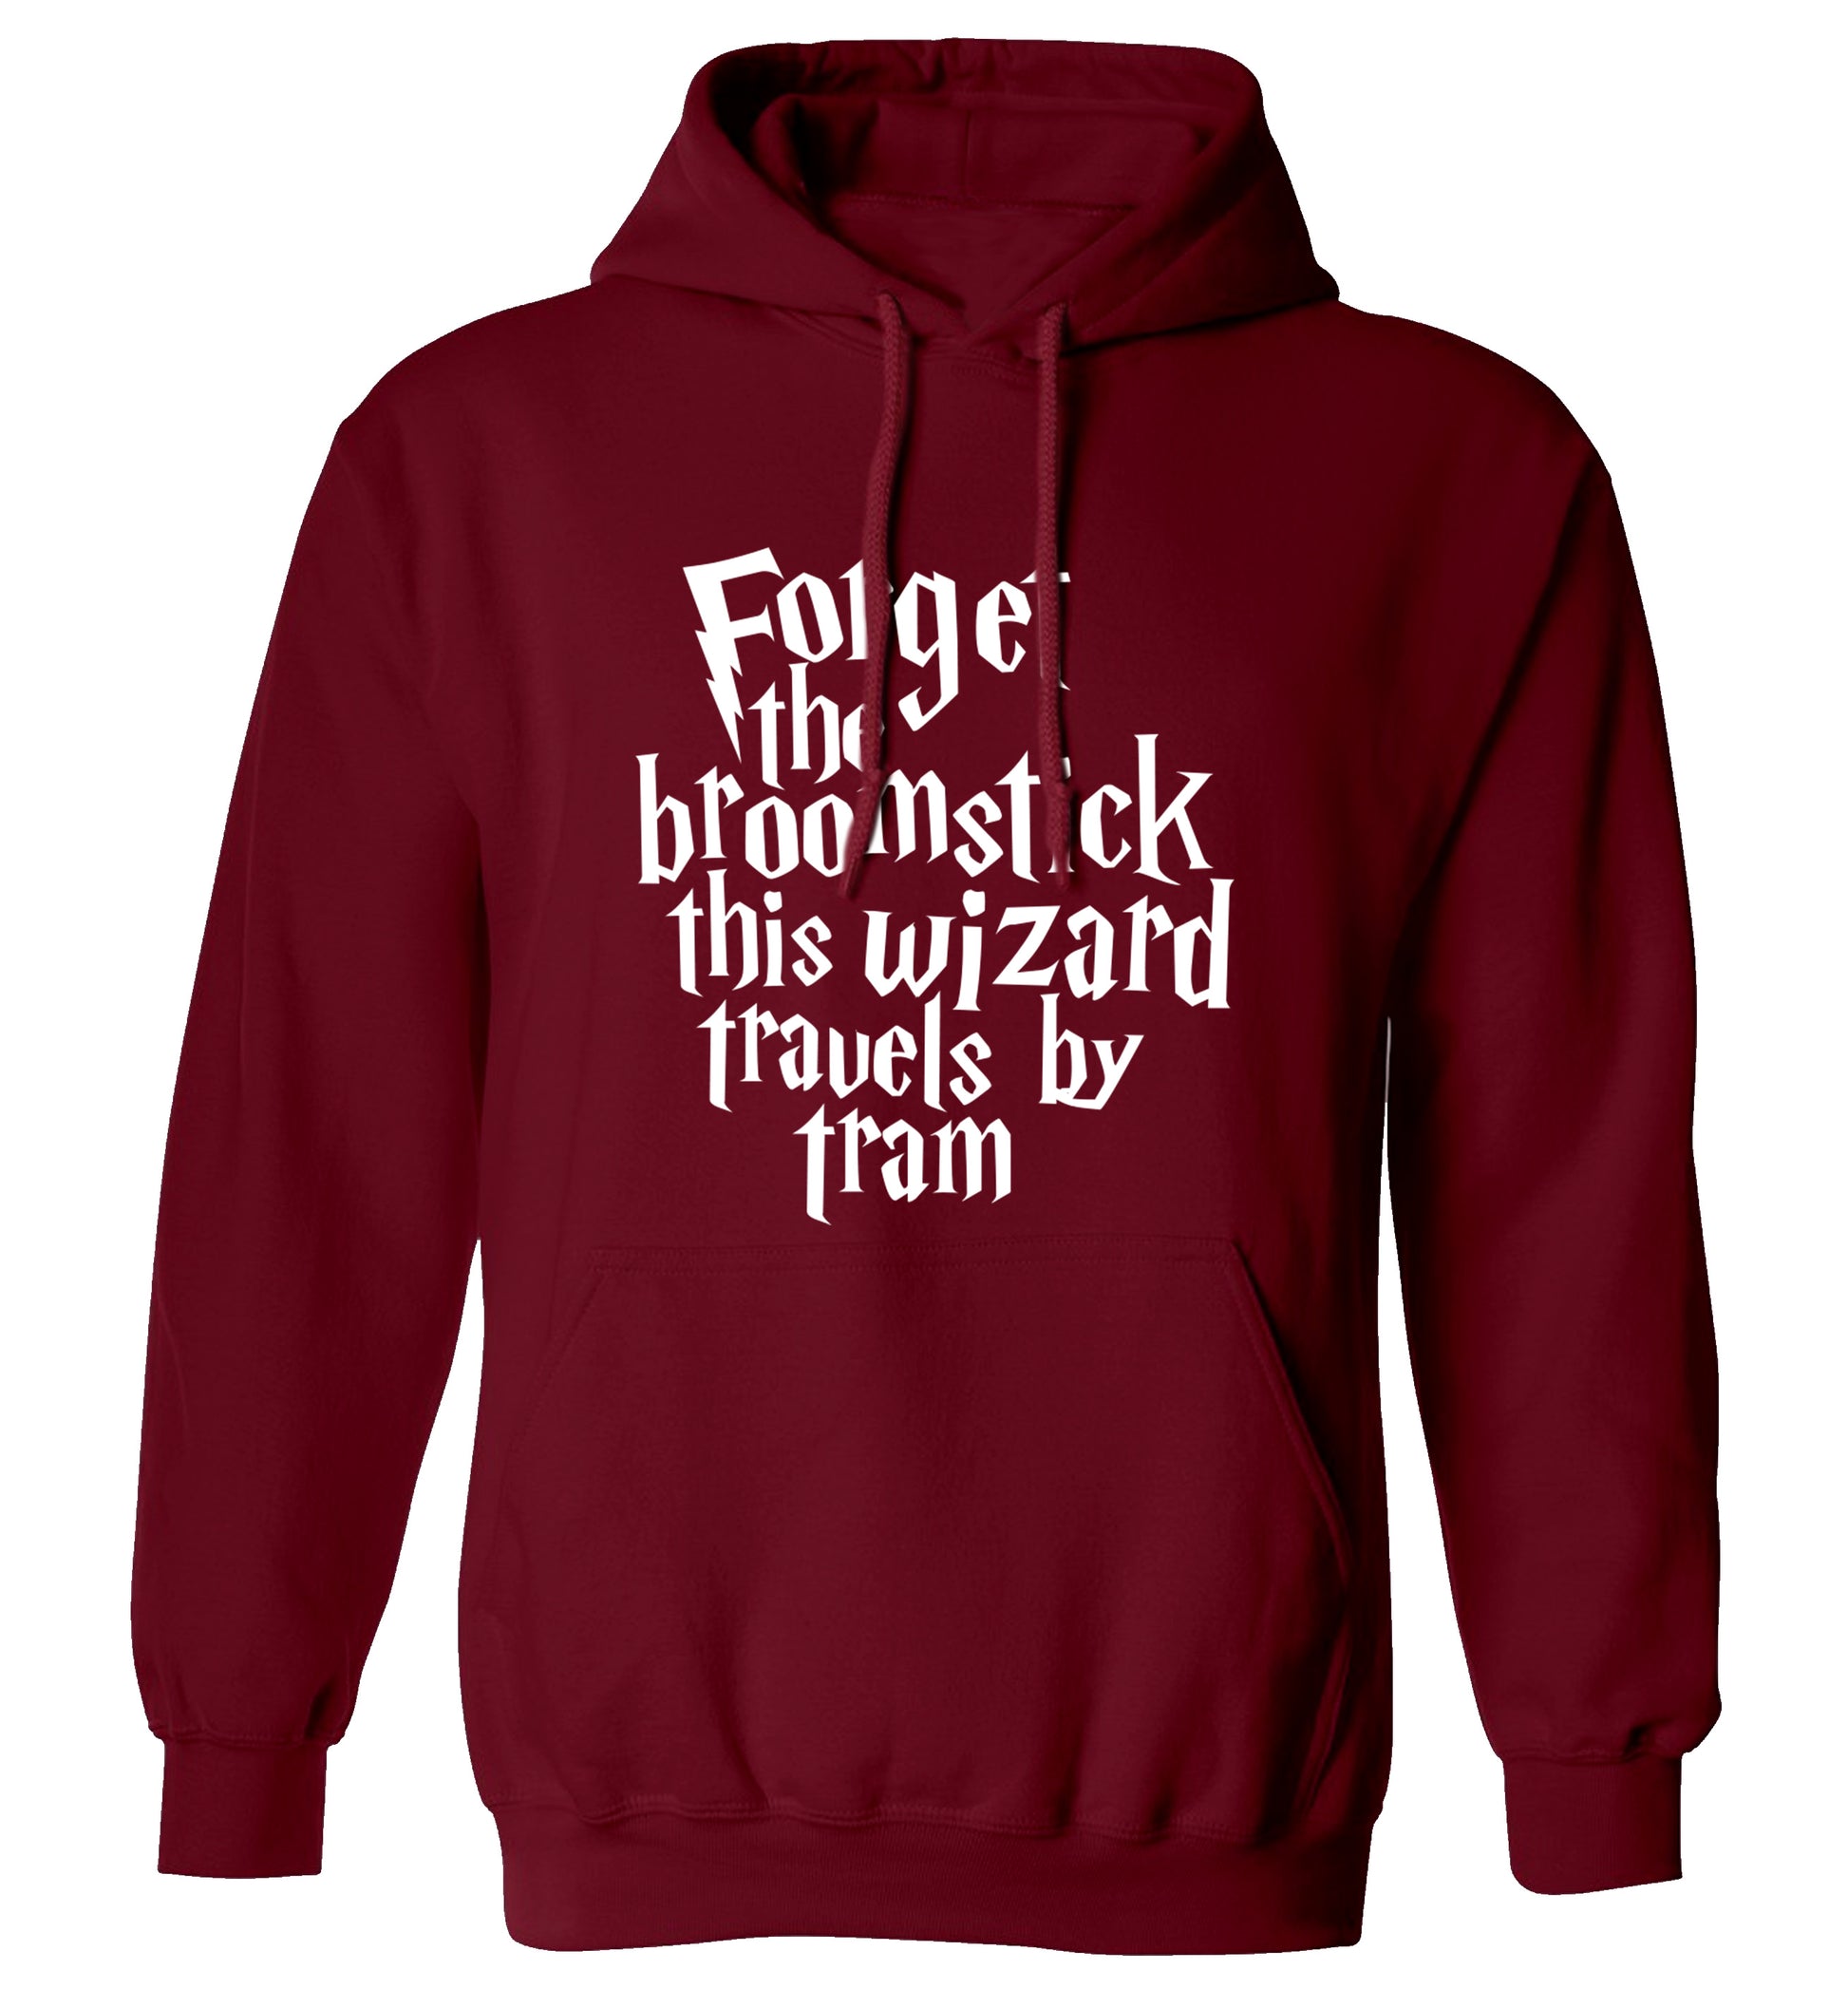 Forget the broomstick this wizard travels by tram adults unisexmaroon hoodie 2XL